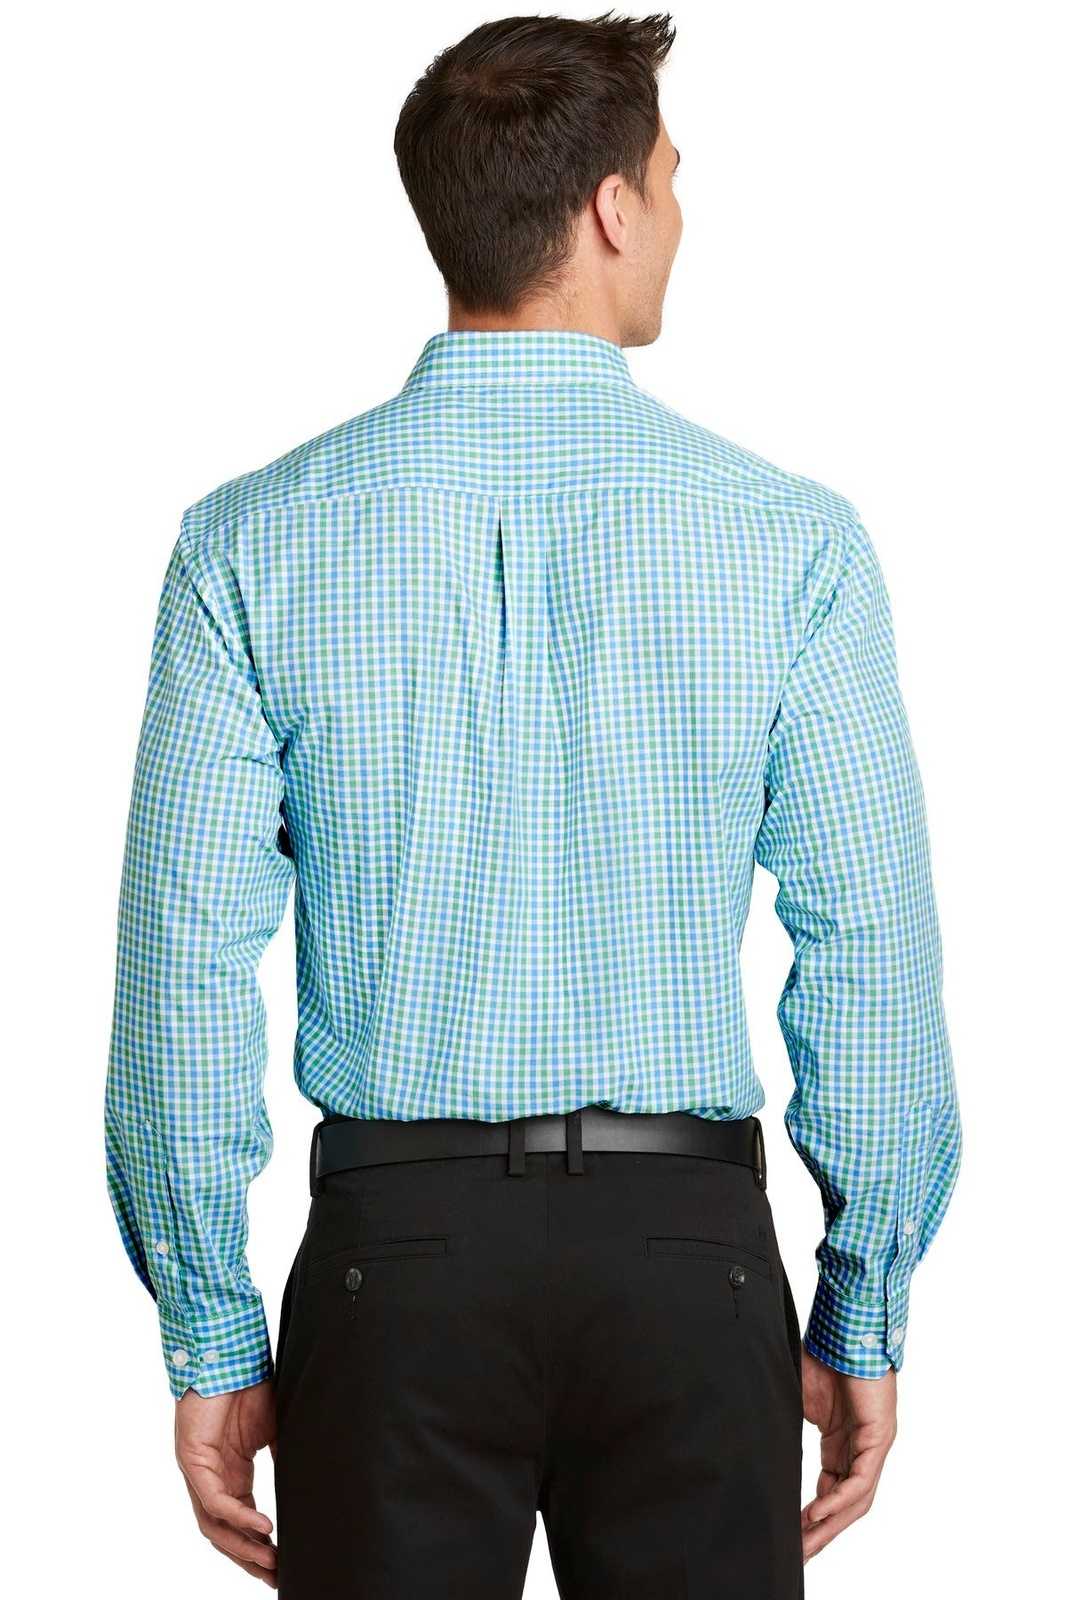 Port Authority S654 Long Sleeve Gingham Easy Care Shirt - Green Aqua - HIT a Double - 2